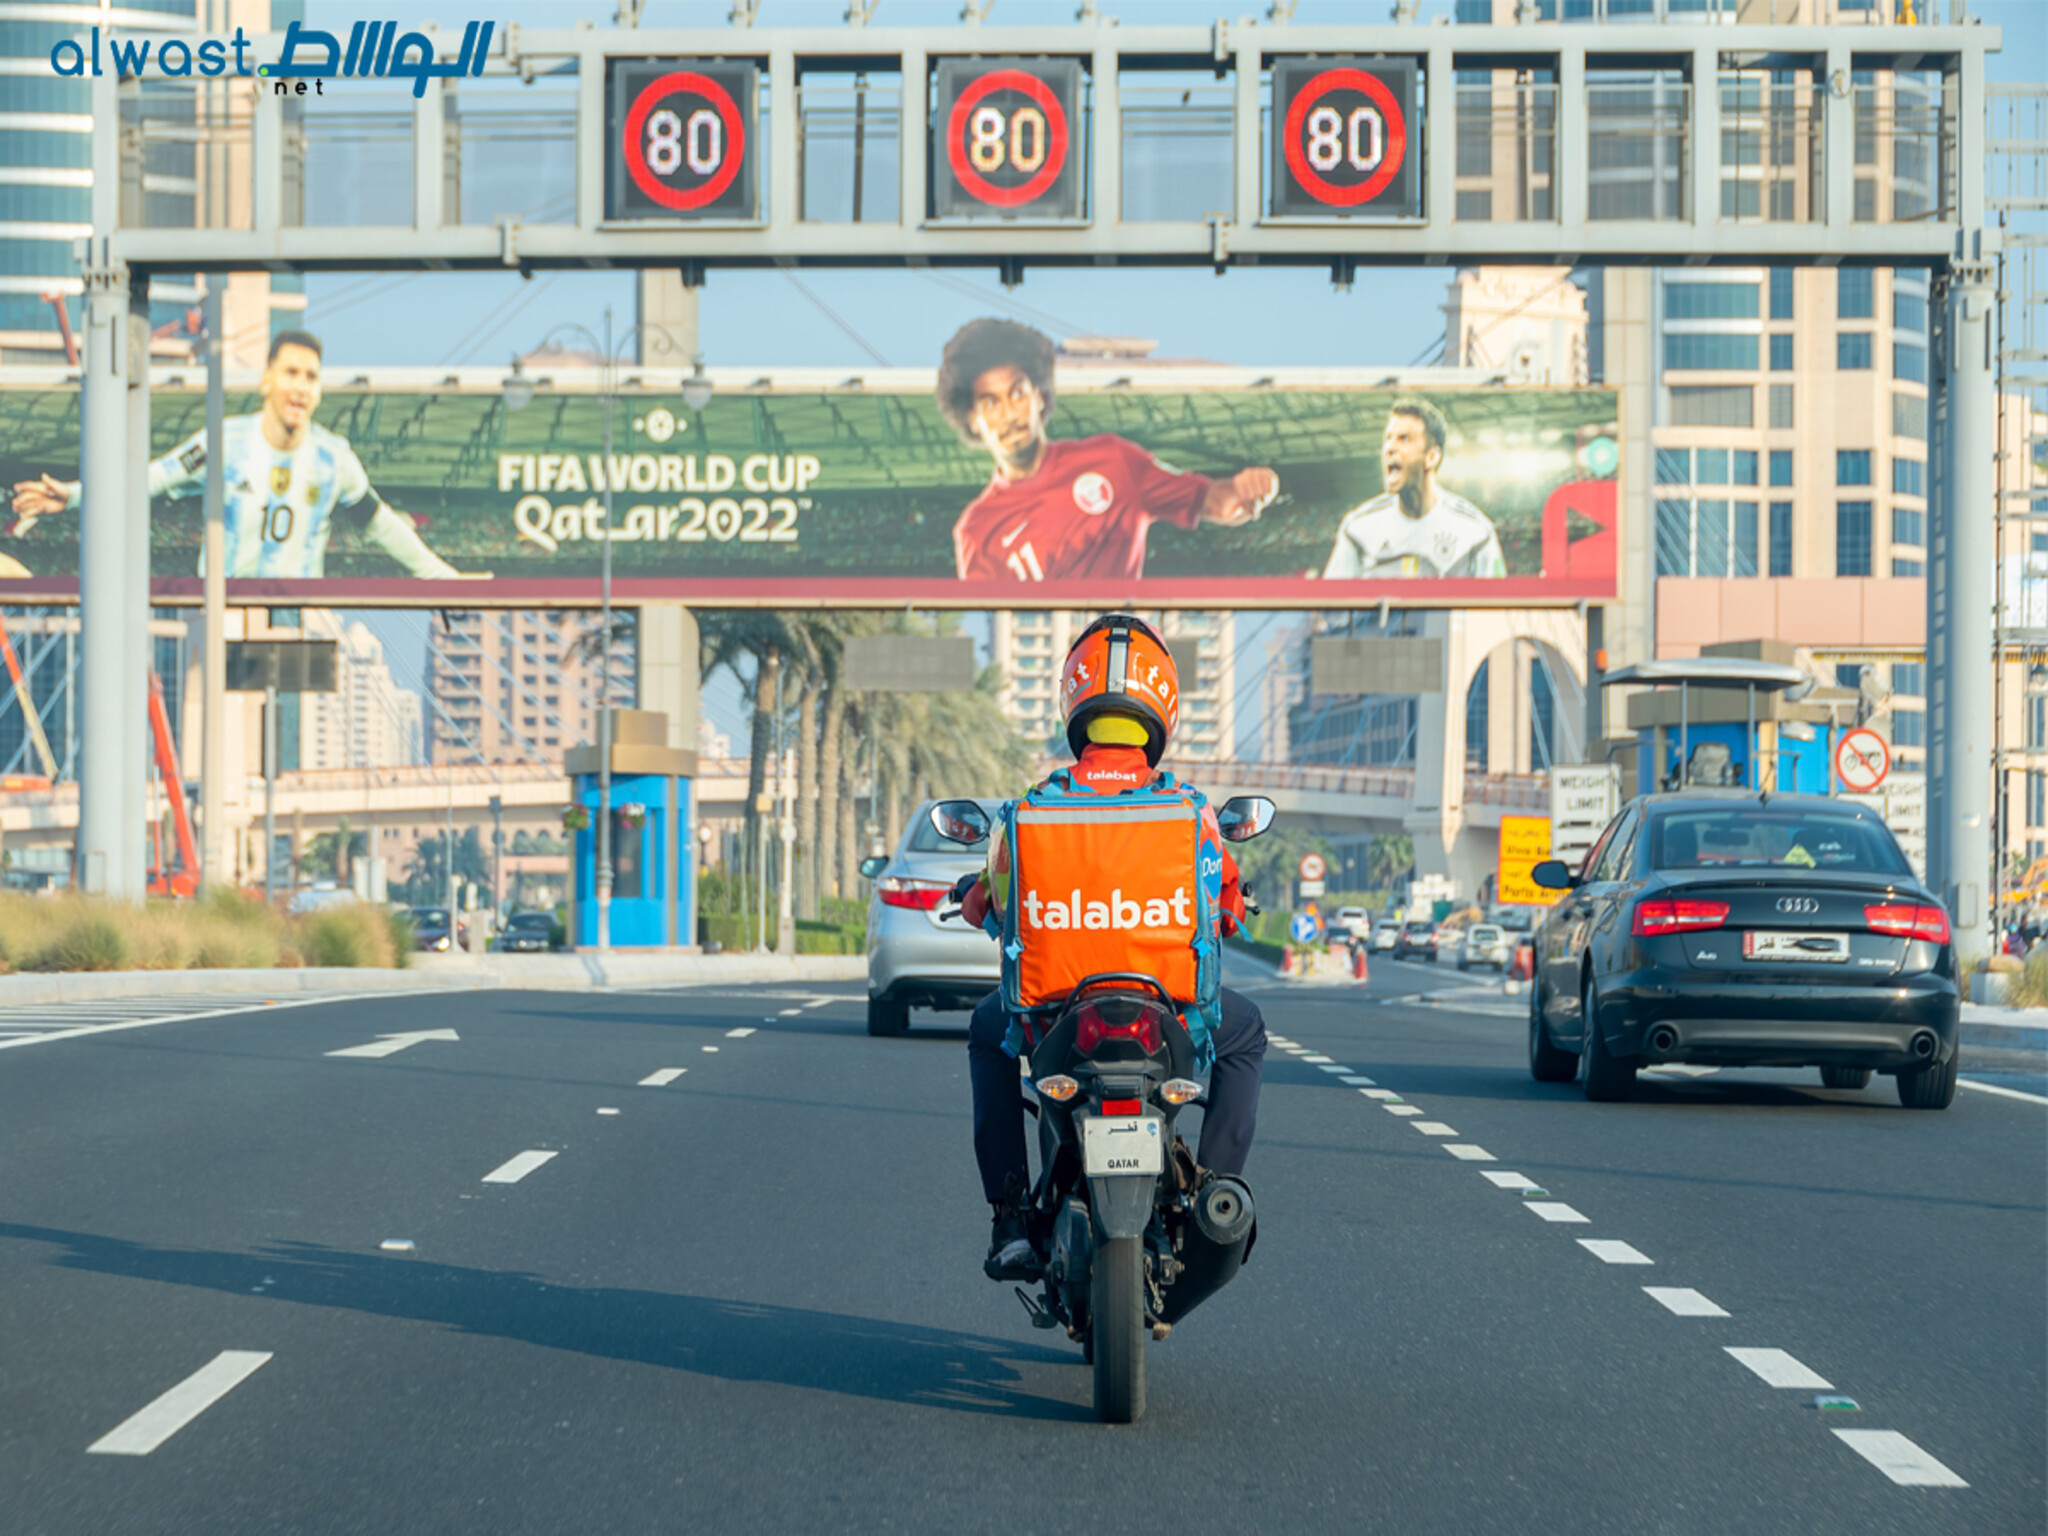 The UAE urges delivery bike drivers to avoid driving in bad weather conditions